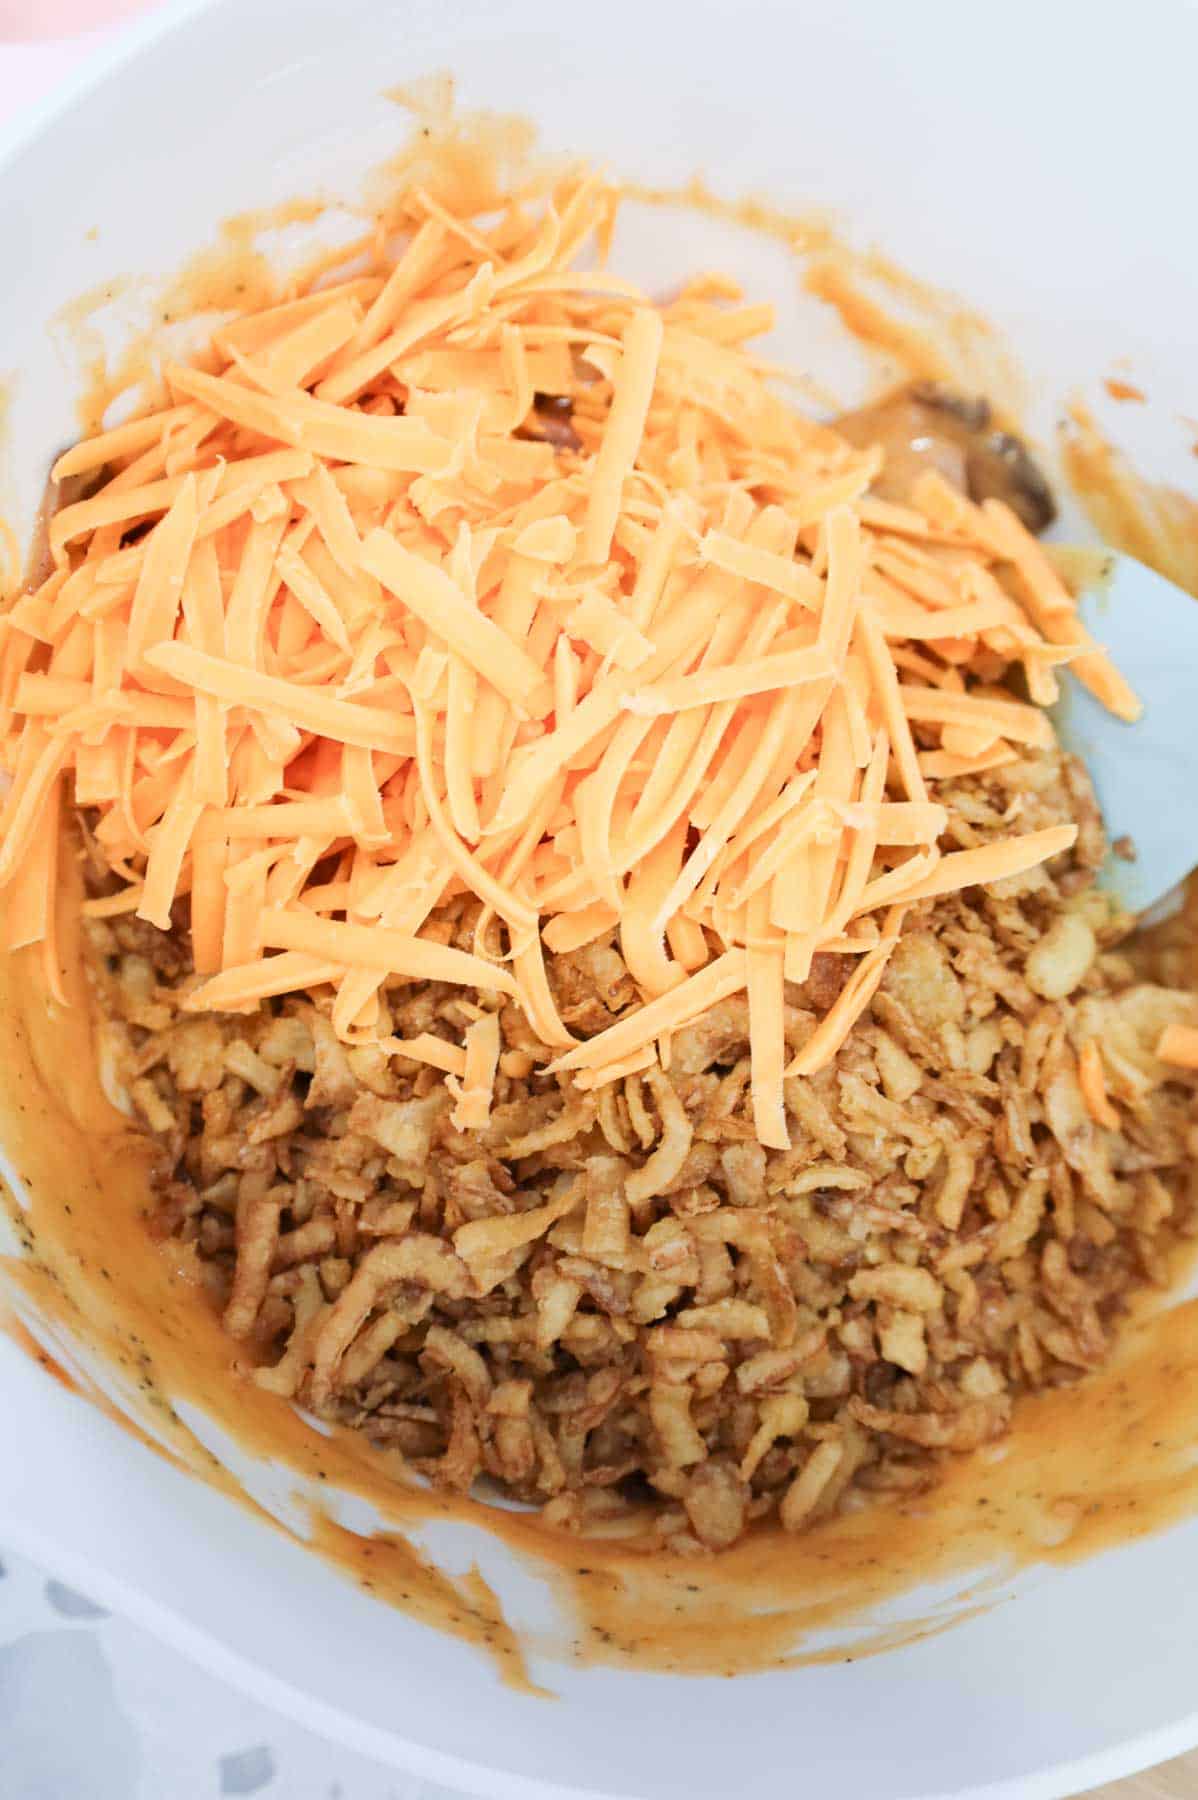 shredded cheddar and French's crispy fried onions in a mixing bowl